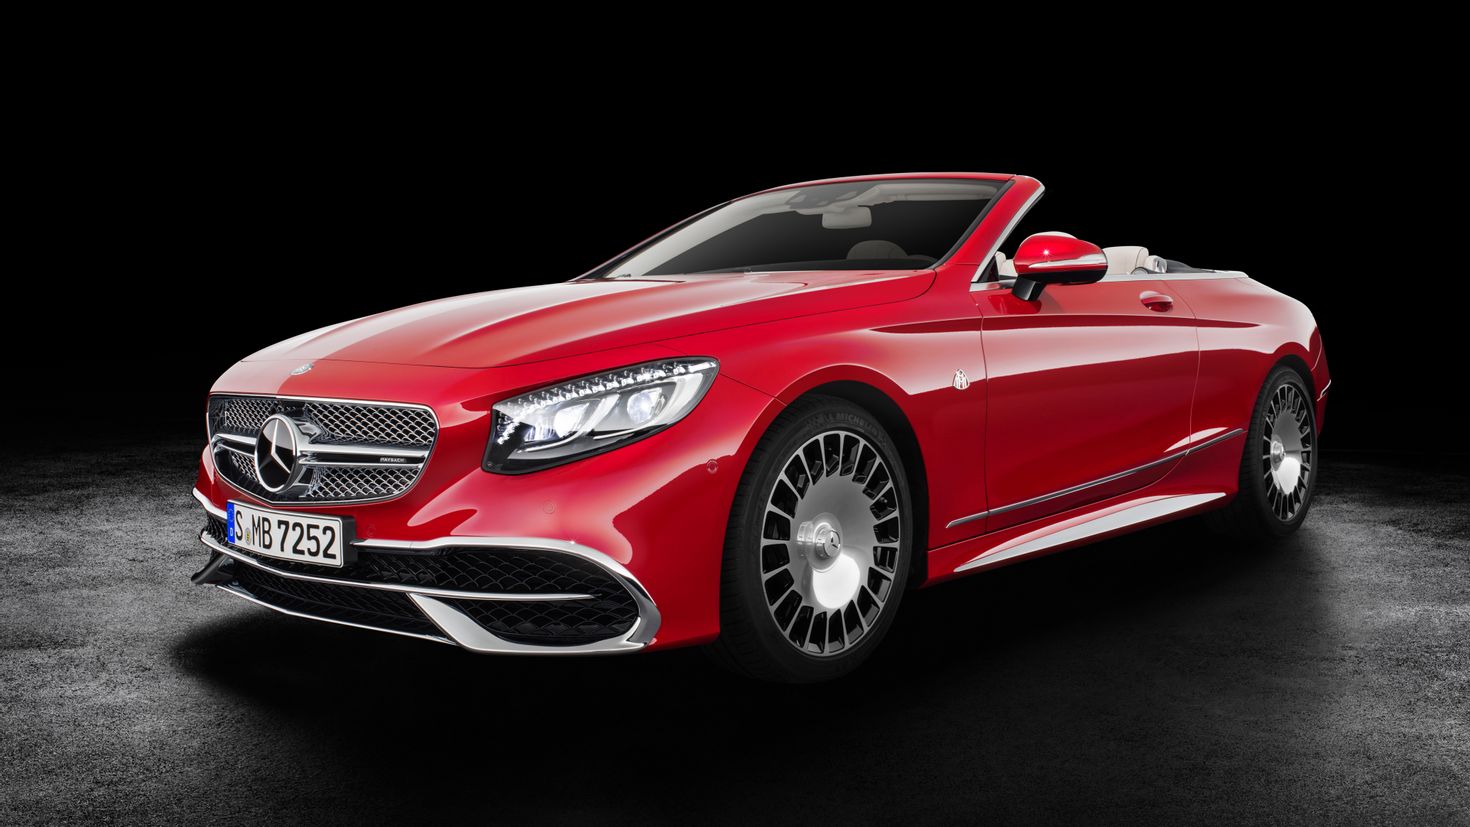 Мерседес s650. Maybach s650 Cabriolet. Mercedes Benz Maybach s650. Mercedes Maybach s650 Cabriolet Red. Mercedes Benz Mercedes-Maybach s 650.